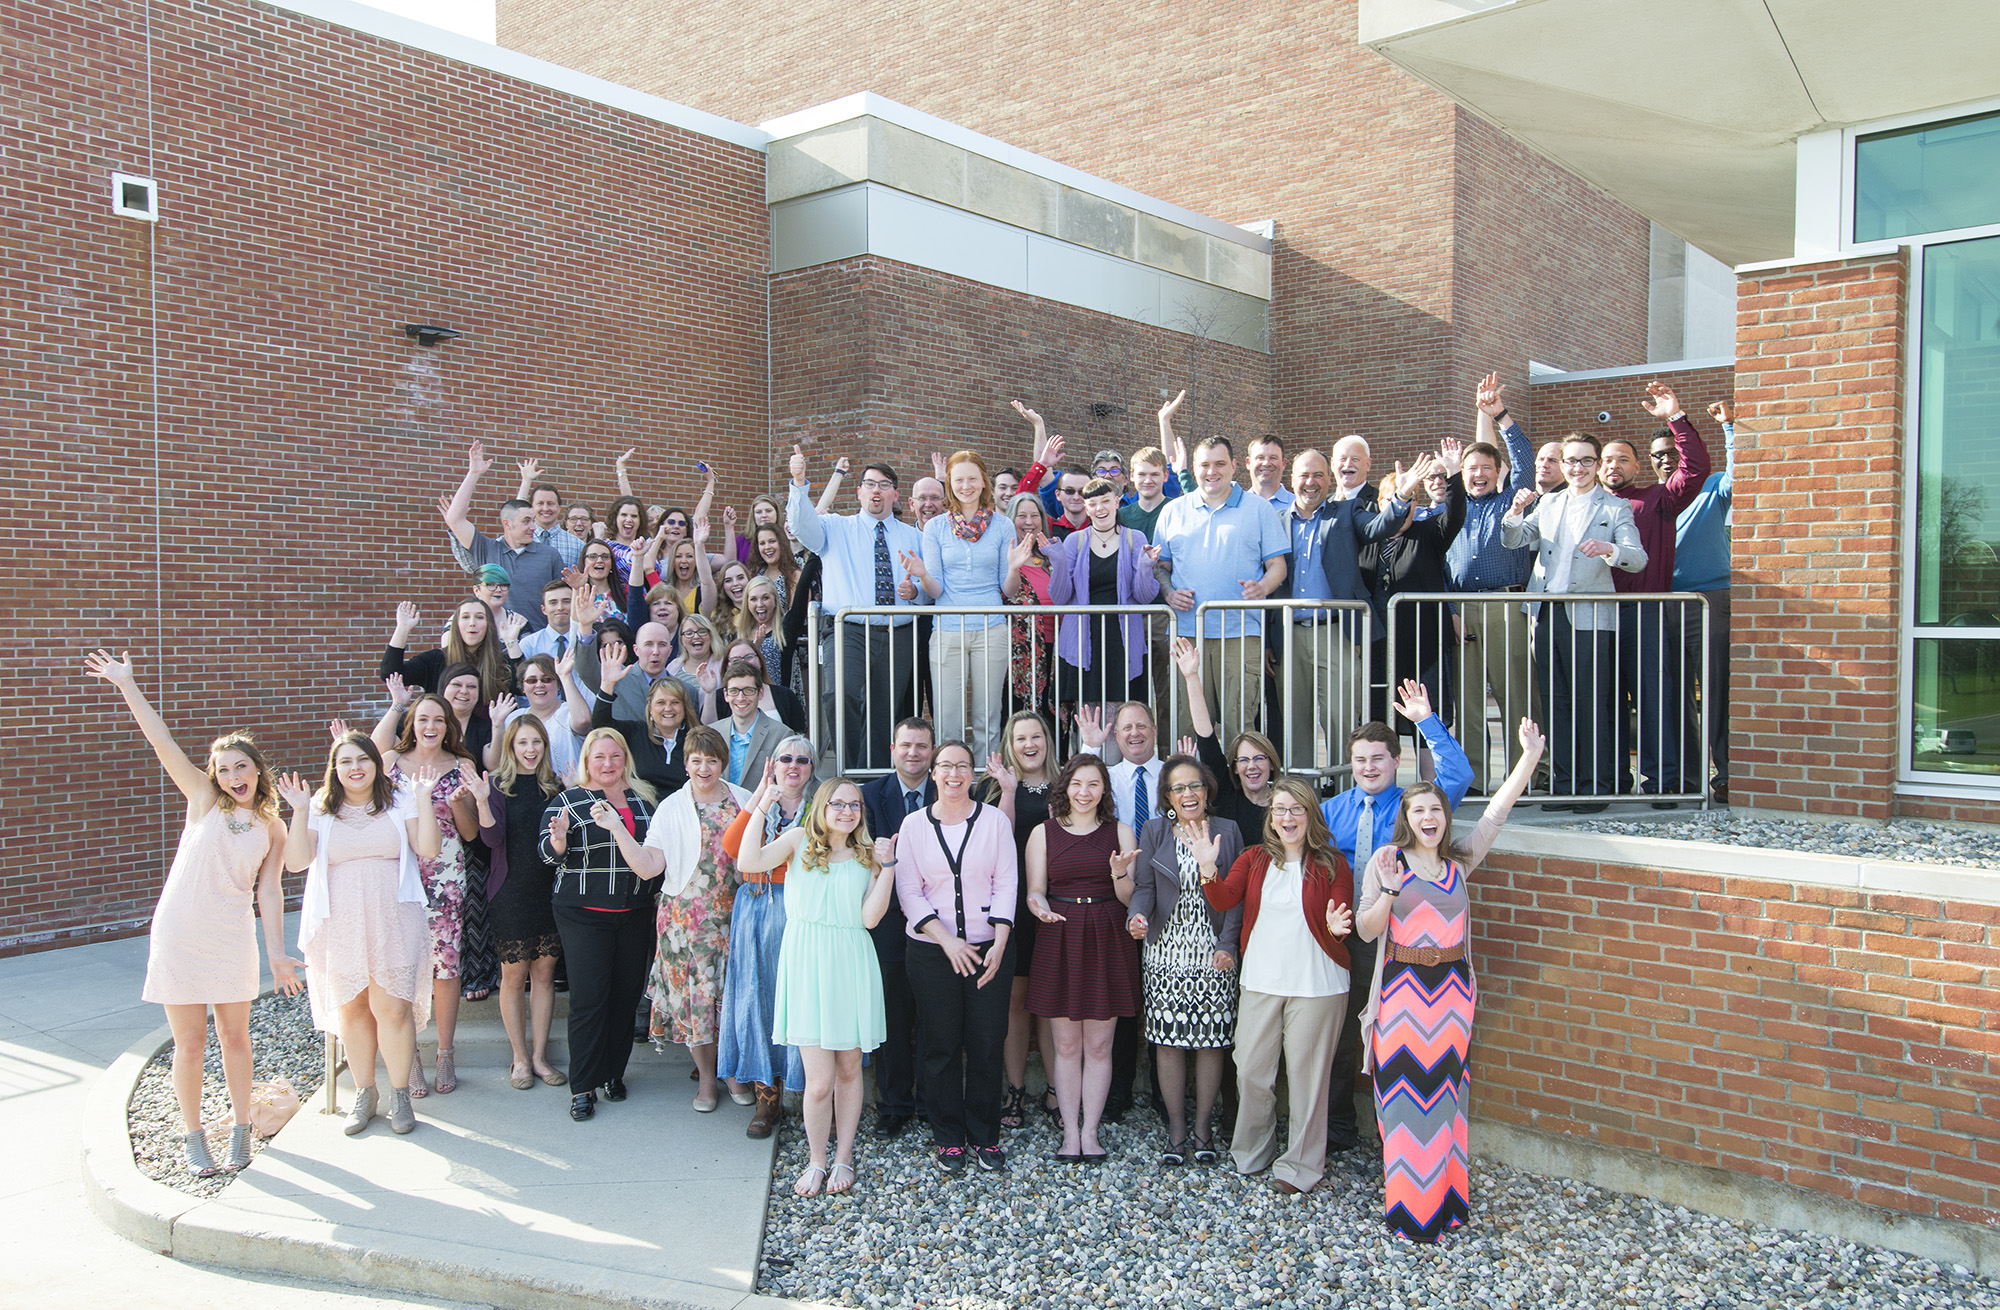 Student Outstanding Bruin Award recipients and staff presenters pose for a group photo outside the Kellogg Room on KCC's North Avenue campus in Battle Creek.